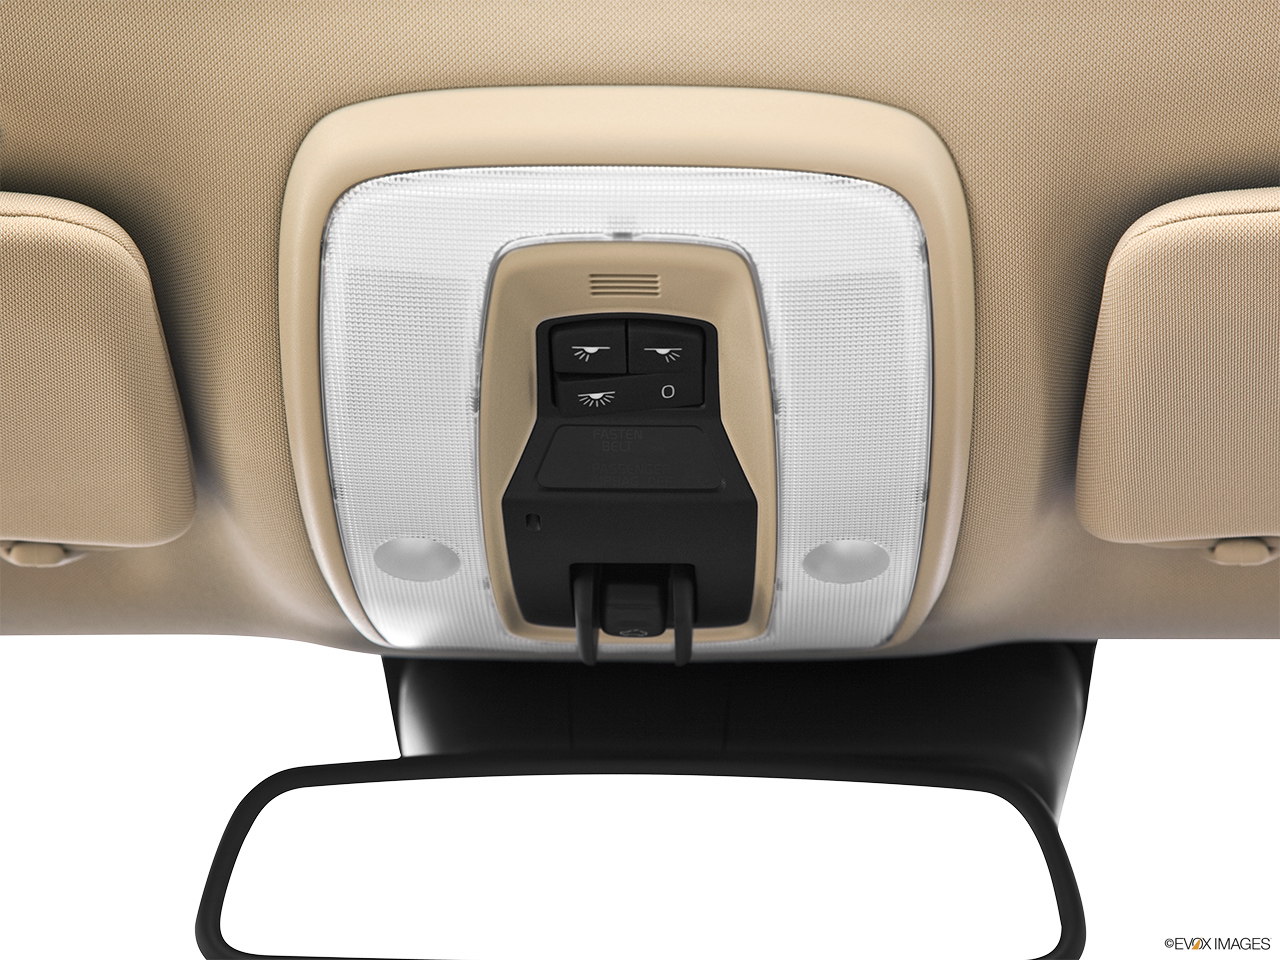 2013 Volvo S60 T5 FWD Premier Courtesy lamps/ceiling controls. 